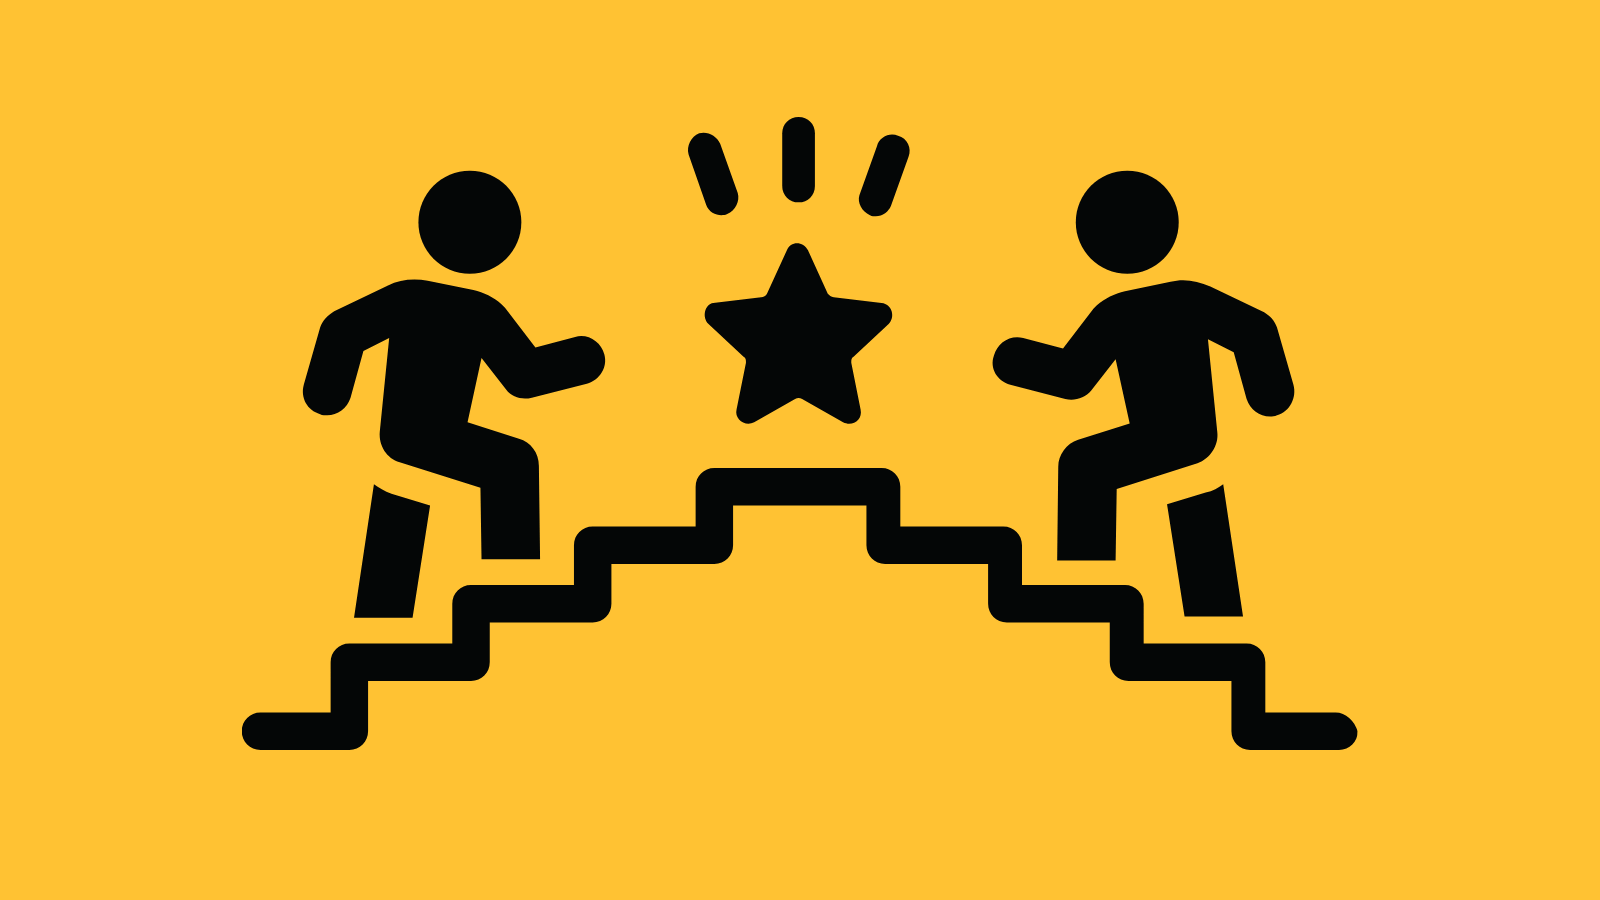 Two people walking up different staircases leading to the same star